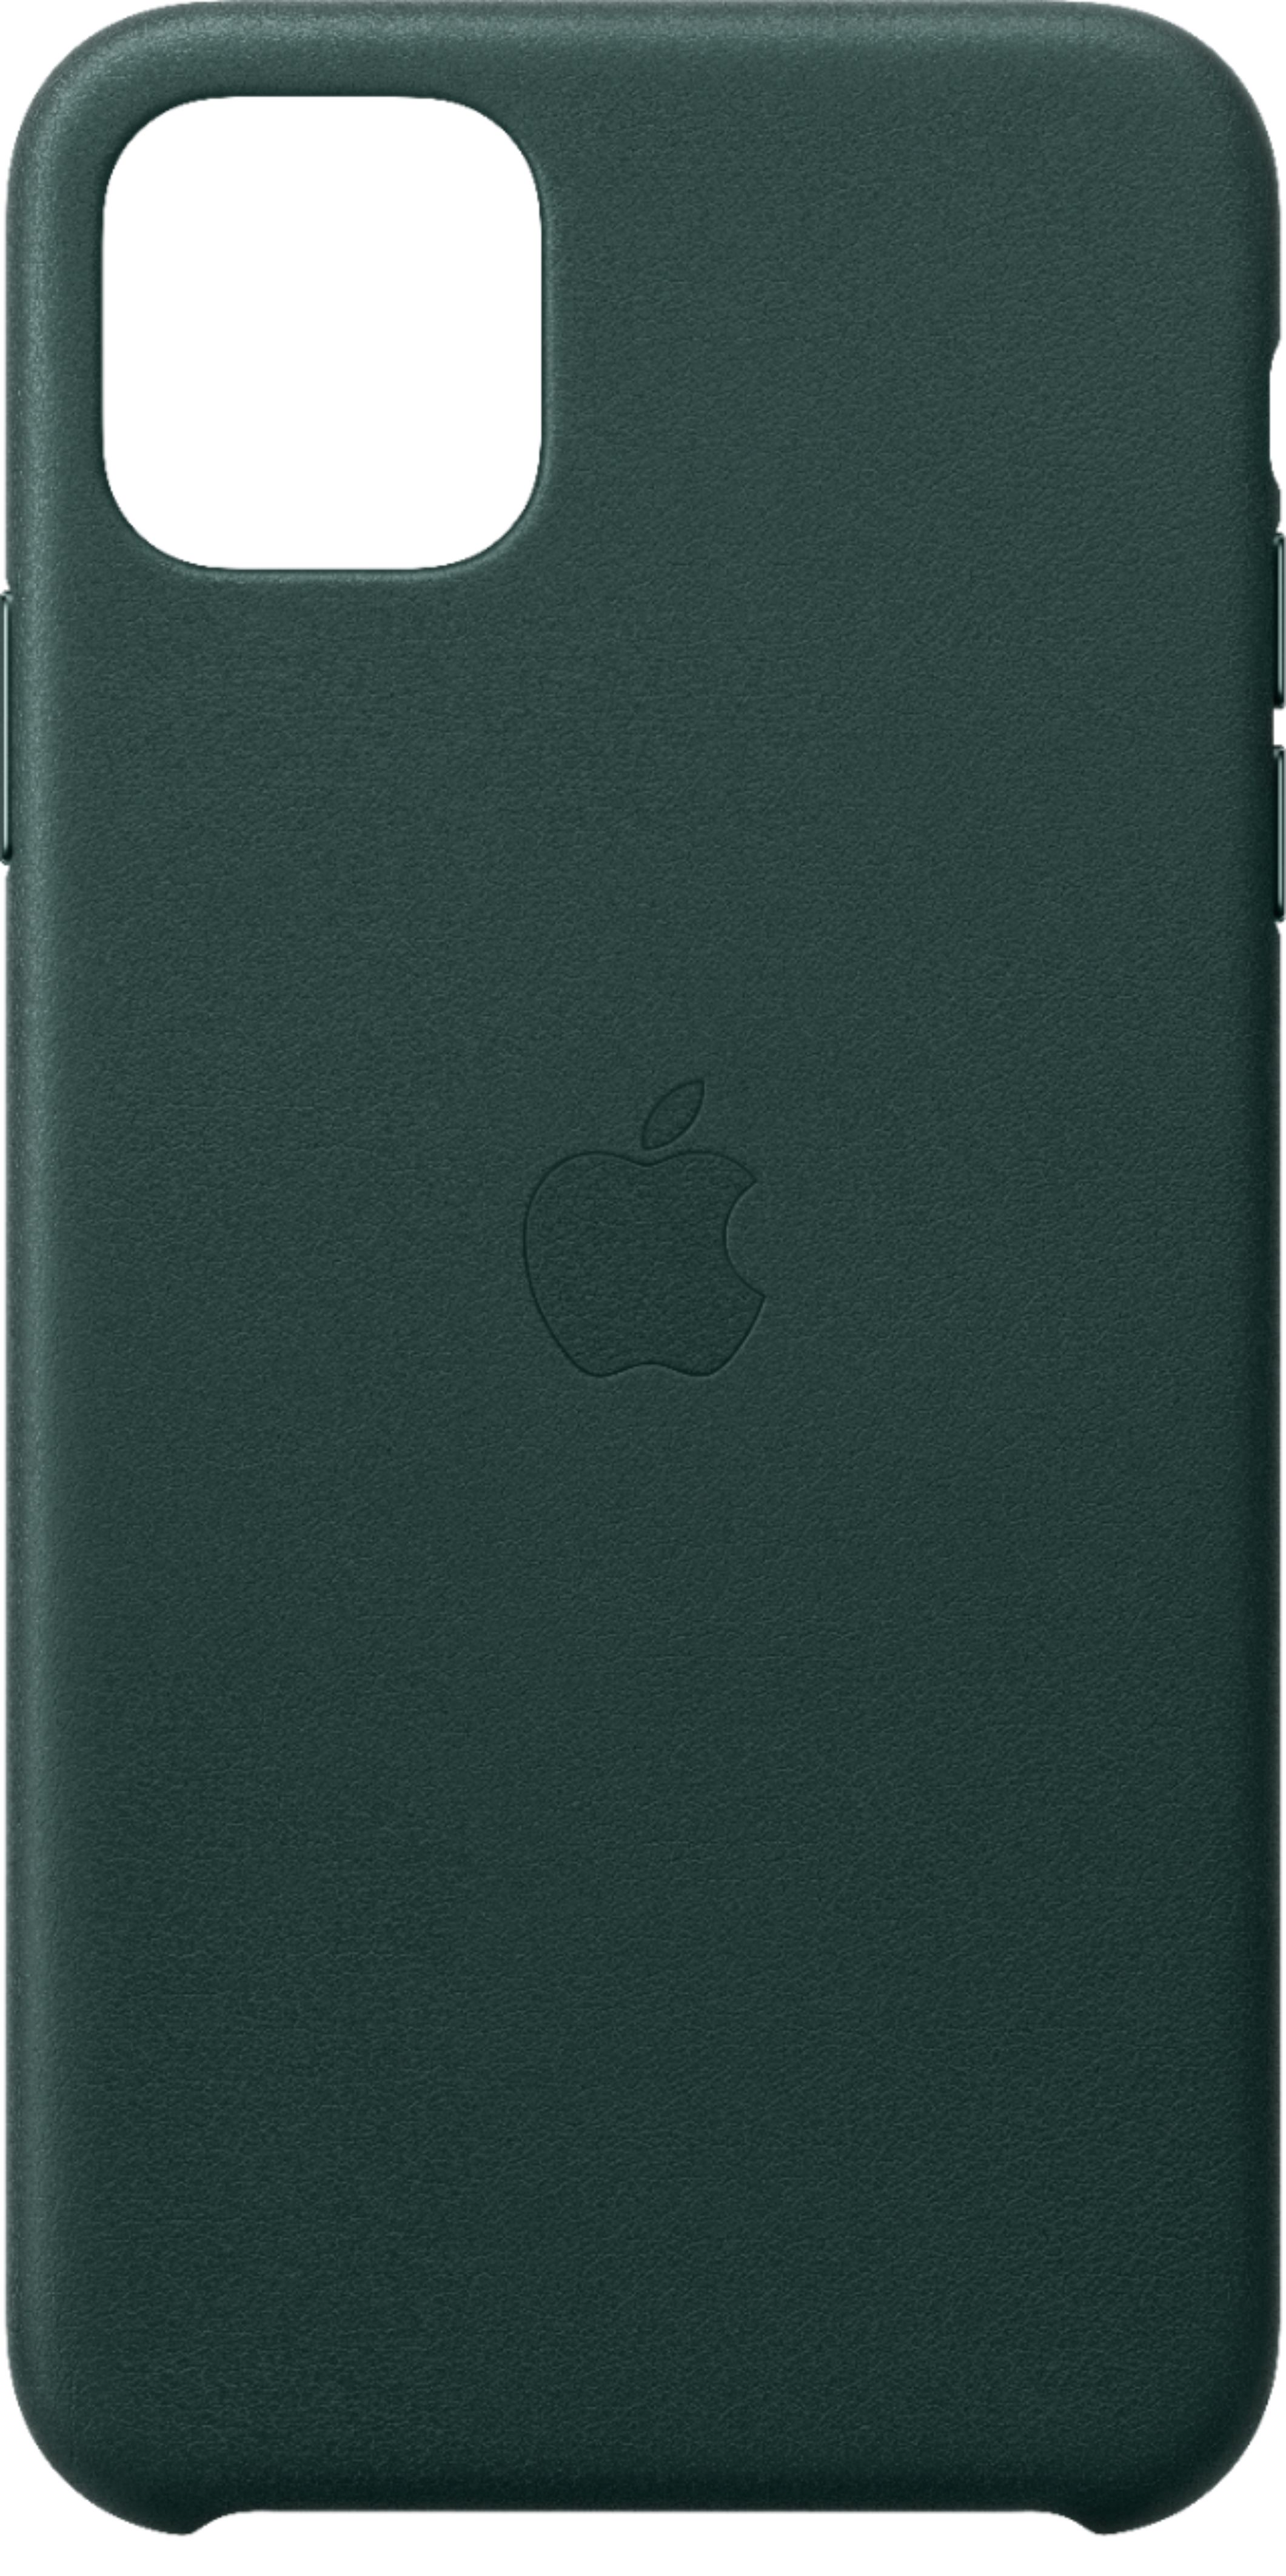 Apple Iphone 11 Pro Max Leather Case Forest Green Mx0c2zm A Best Buy